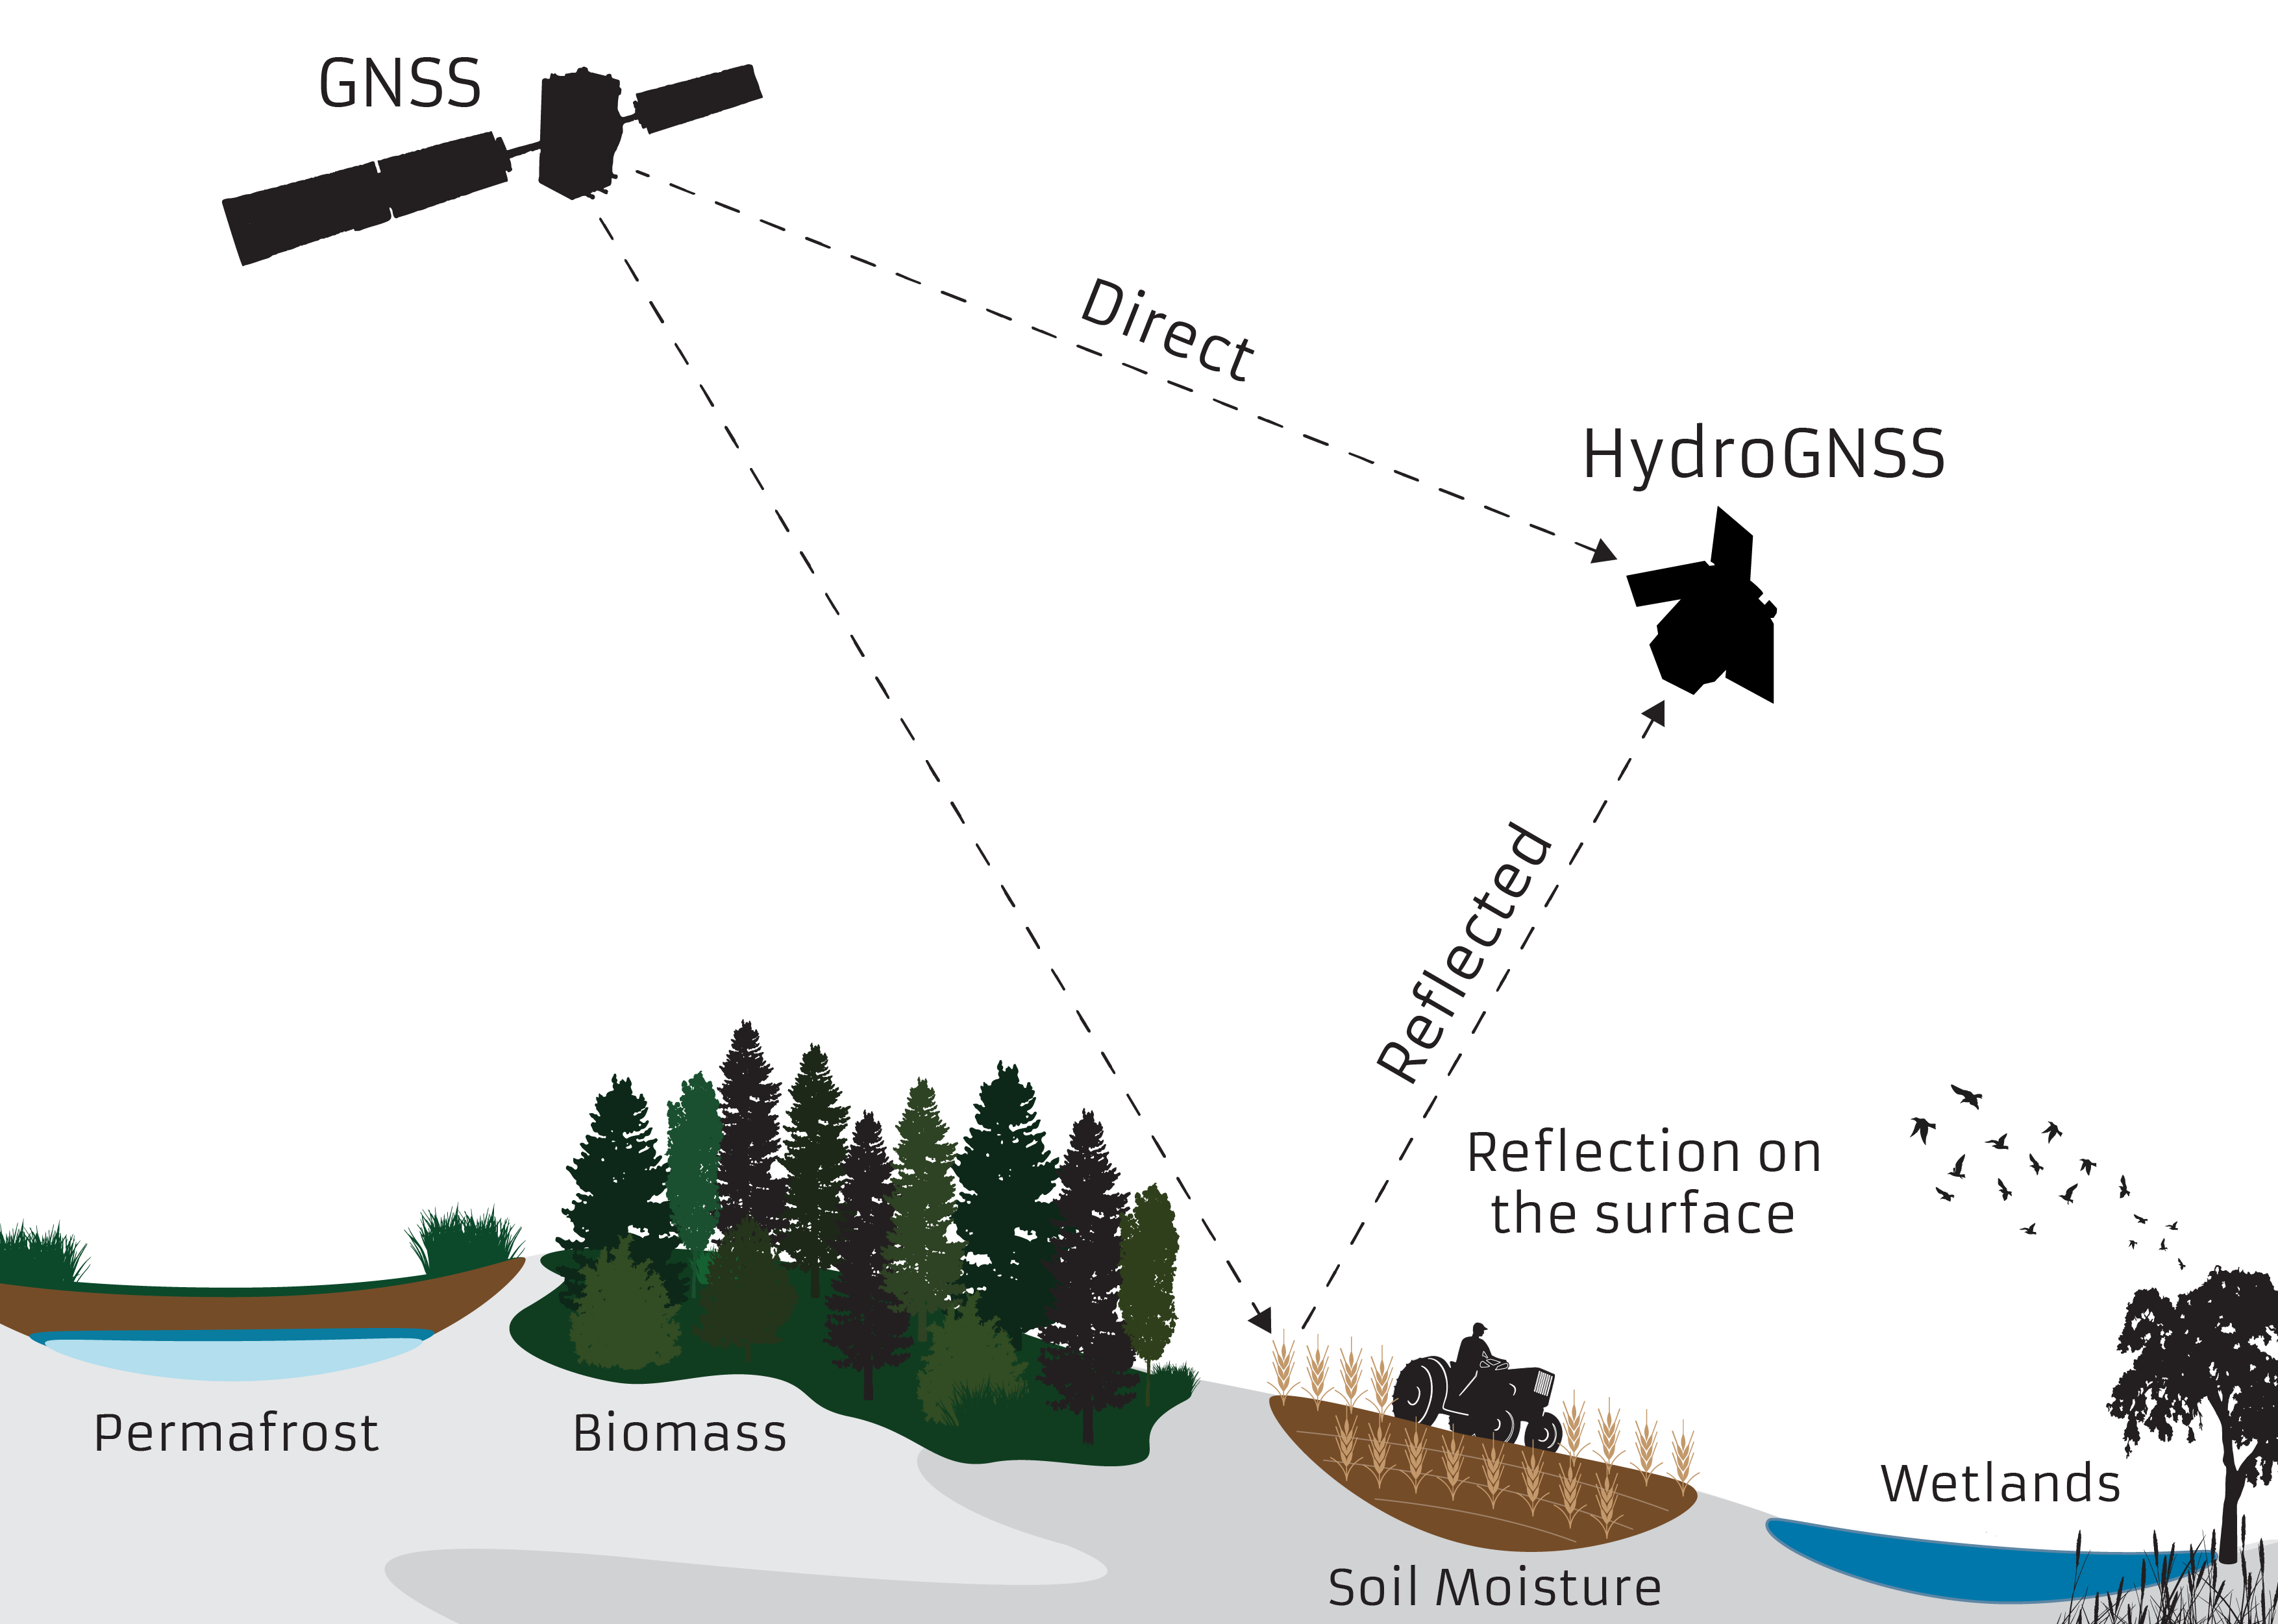 HydroGNSS is using GNSS reflectometry for climate studies Image courtesy of ESA